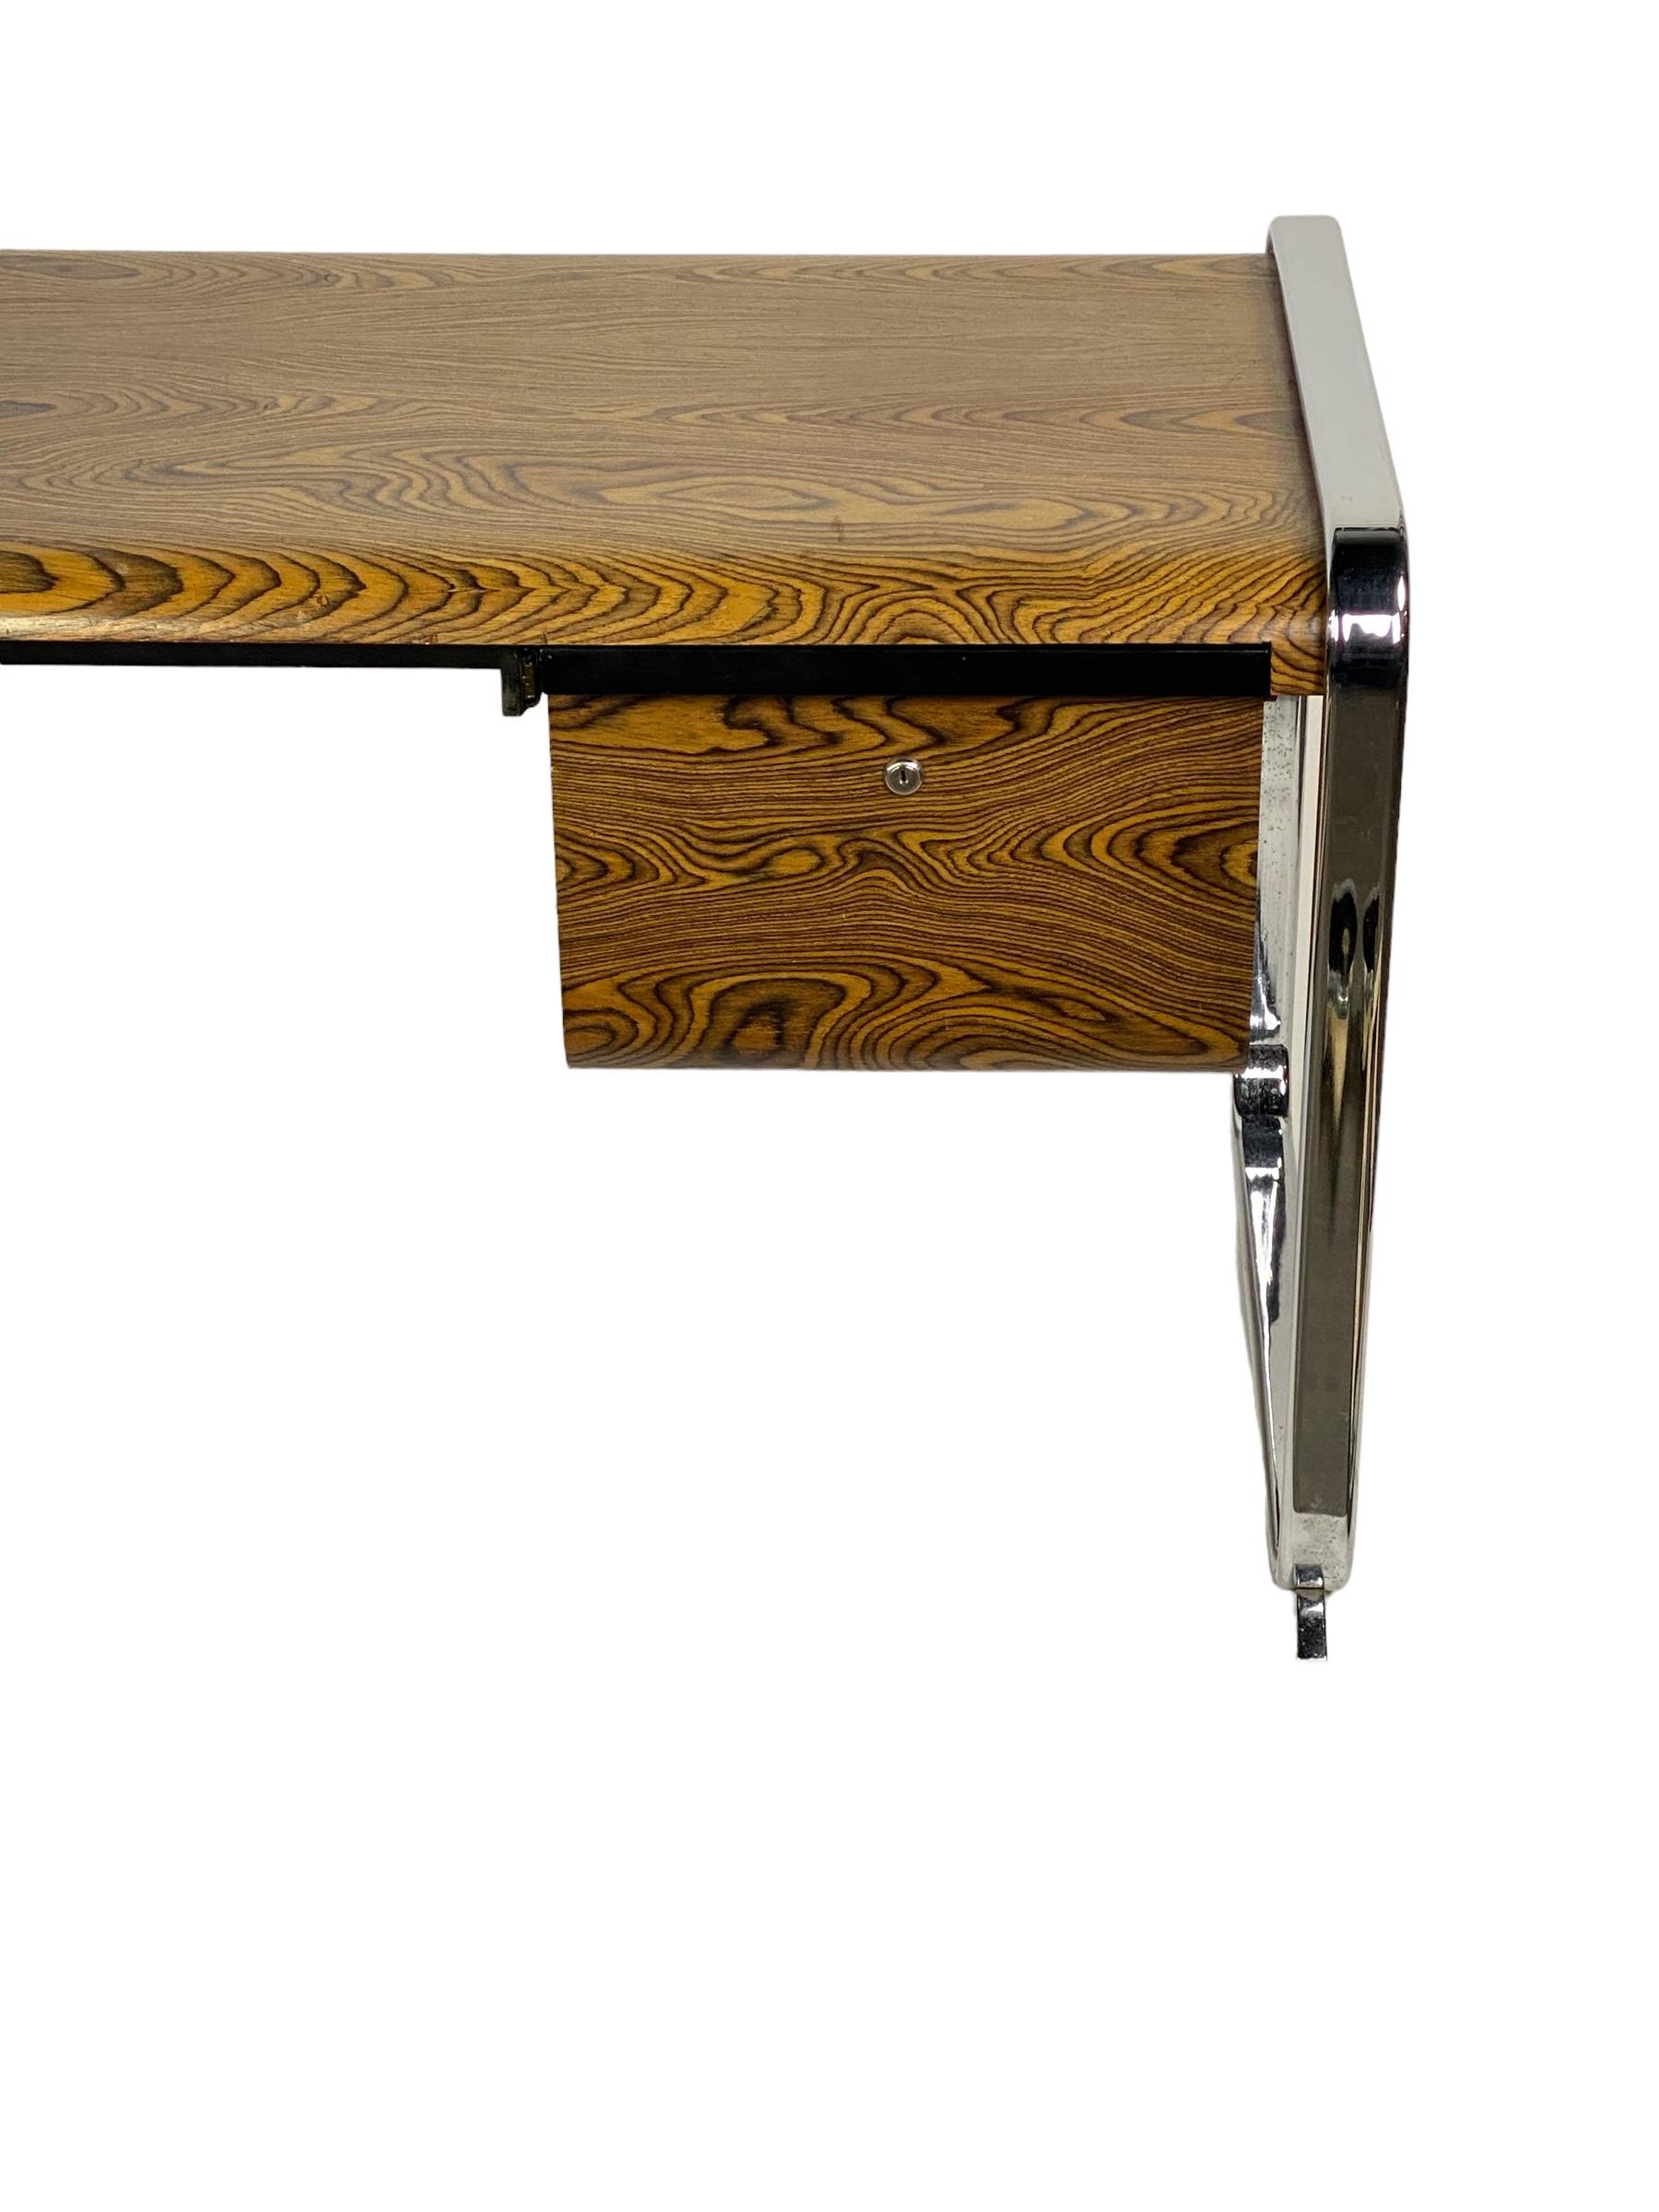 20th Century Herman Miller Zebra Wood and Chrome Desk Designed by Peter Protzman